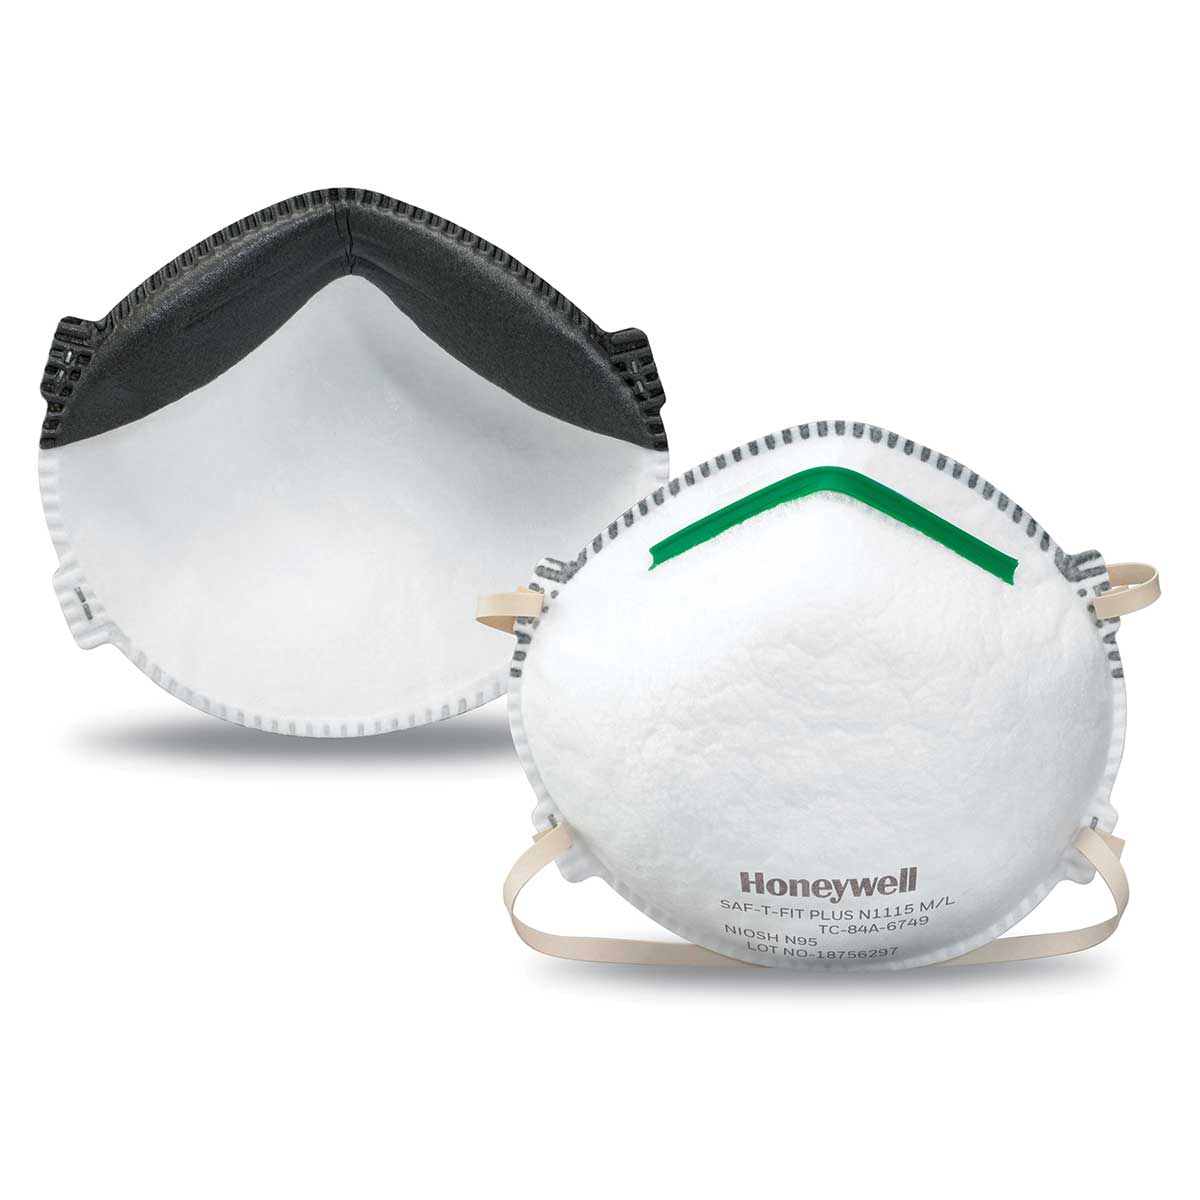 Honeywell Saf-T-Fit Plus N95 Particulate Respirator with Boomerang Nose Seal, Box of 20